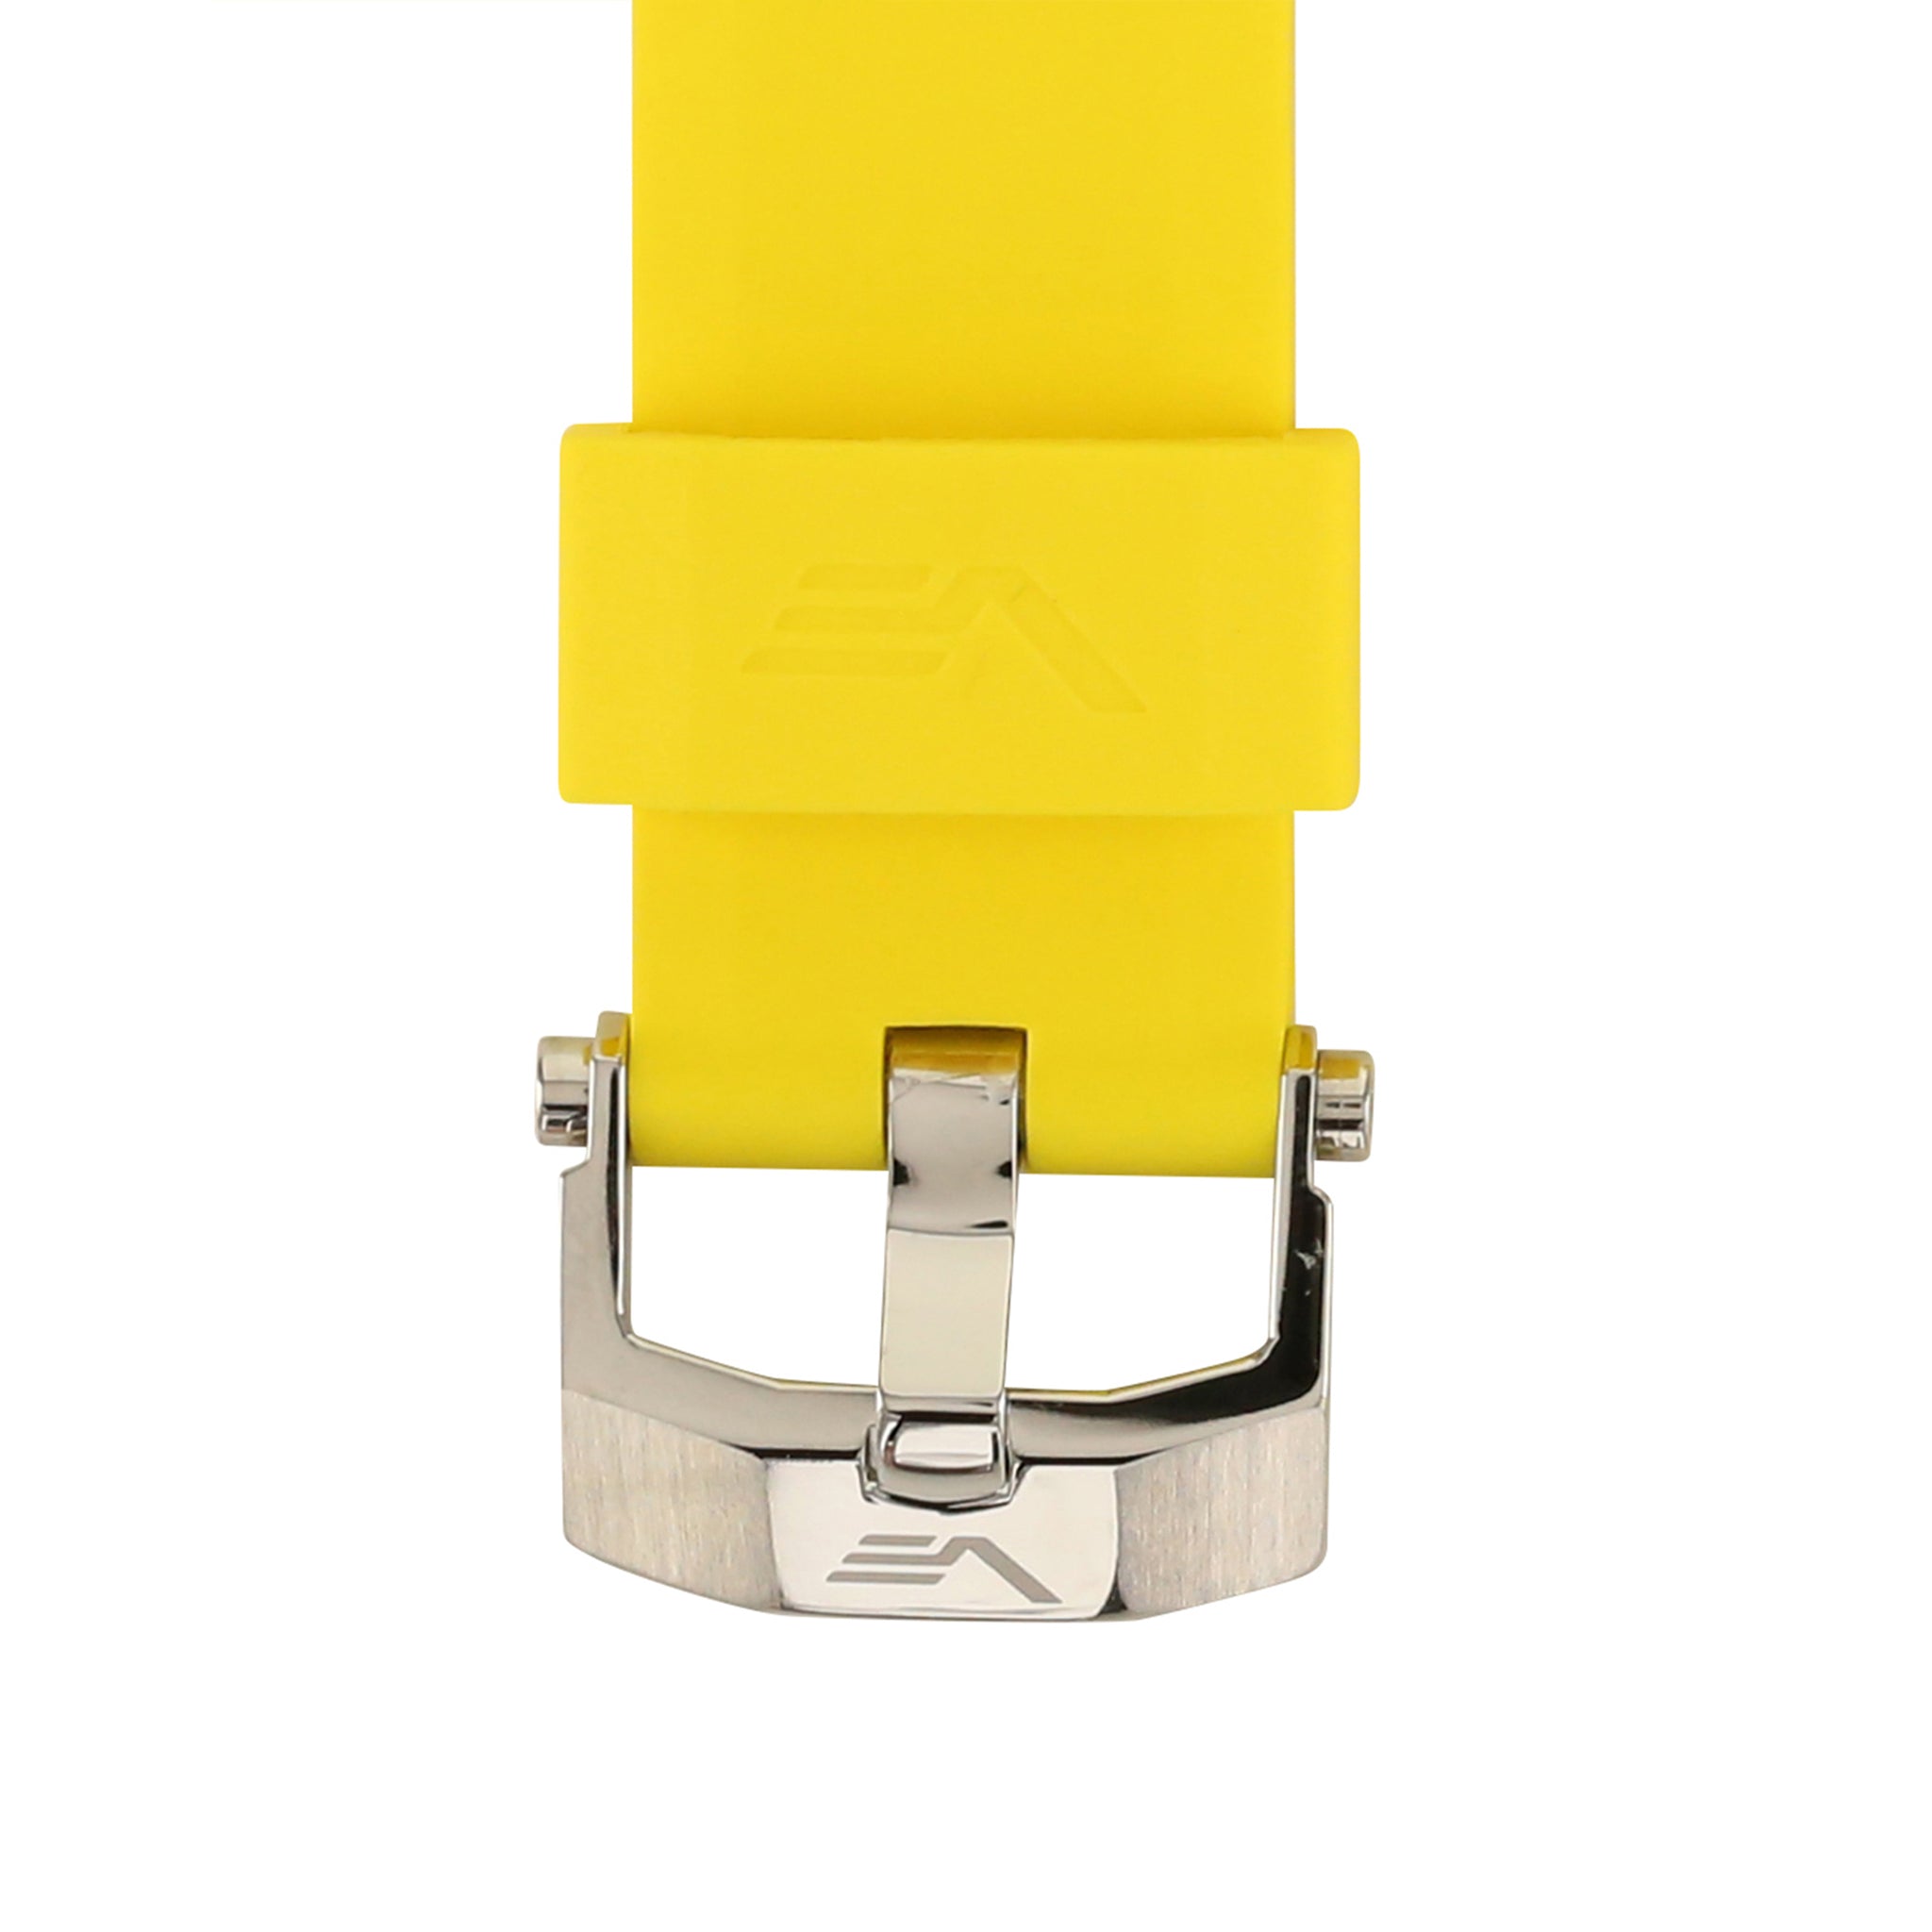 LUNOKHOD 2 YELLOW SILICONE STRAP 25mm - POLISHED BUCKLE